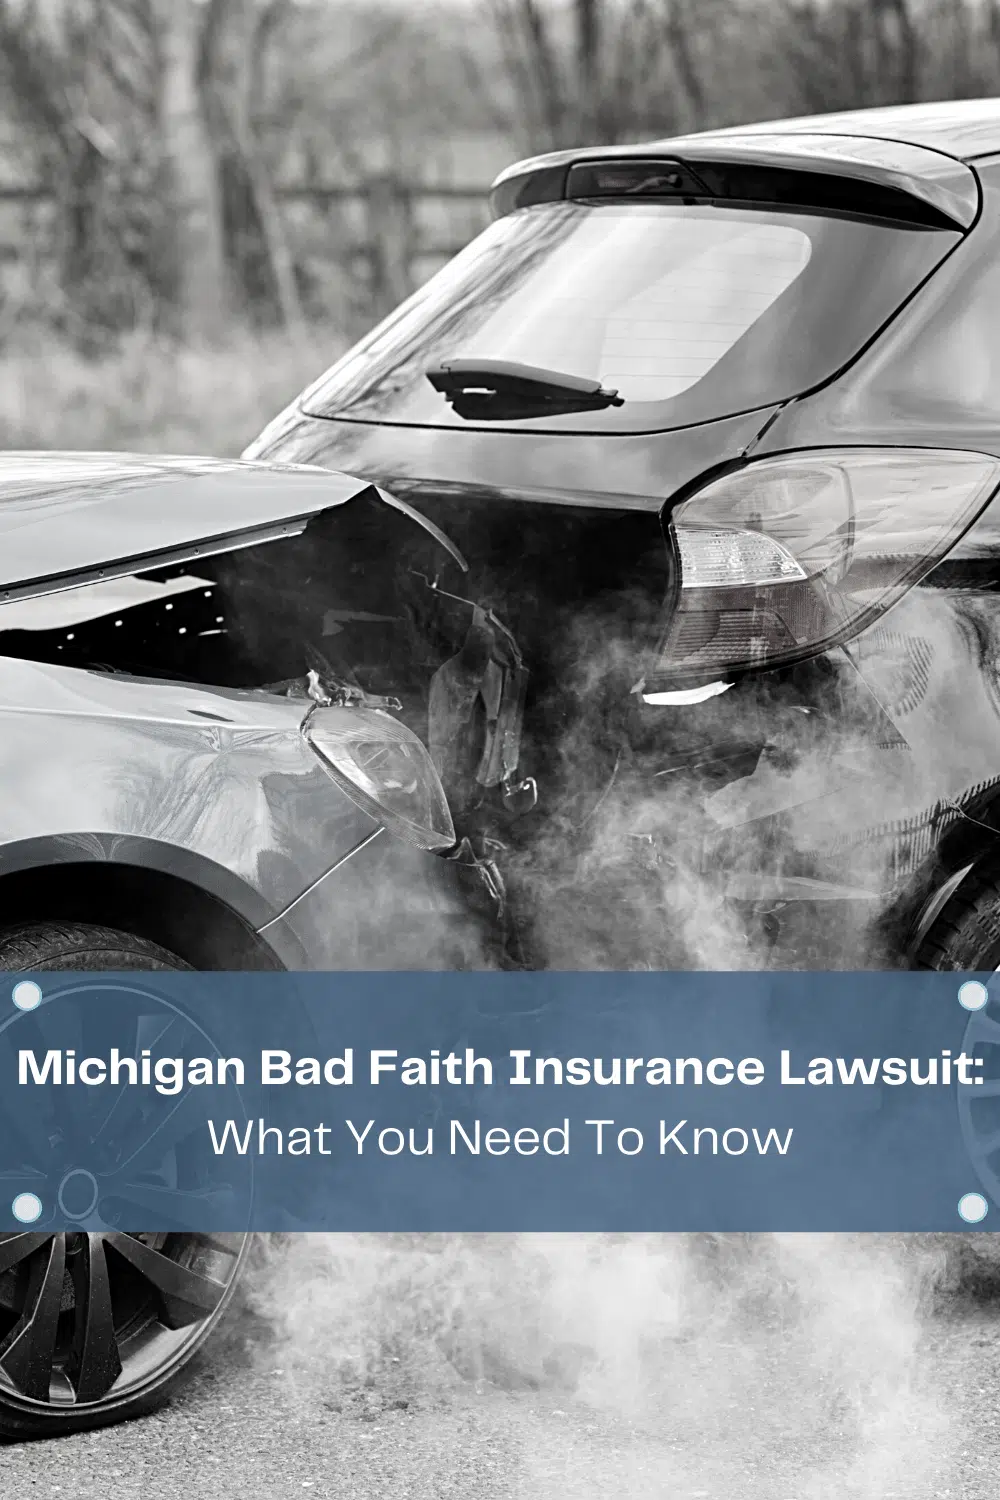 Michigan Bad Faith Insurance Lawsuit: What You Need To Know